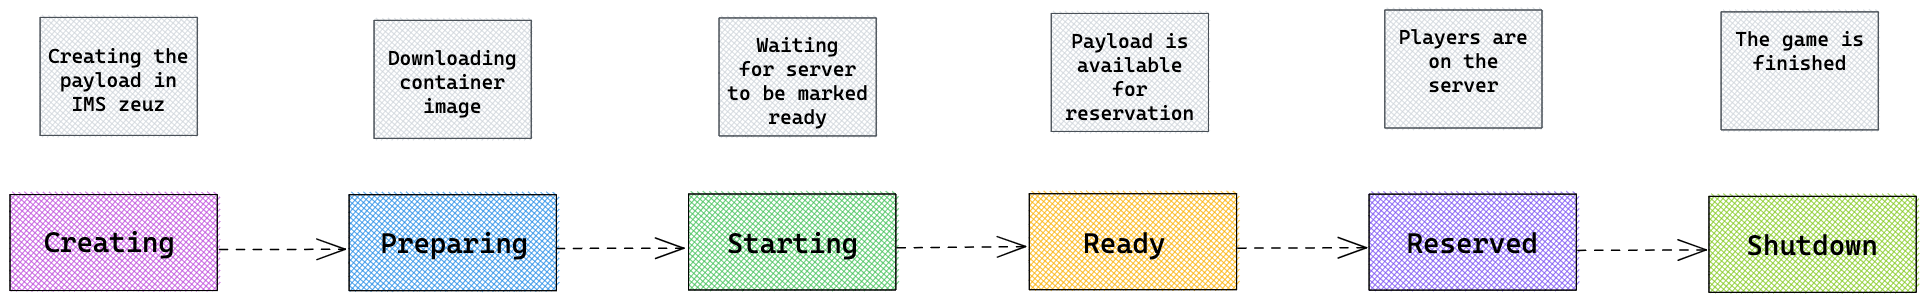 Payload Lifecycle